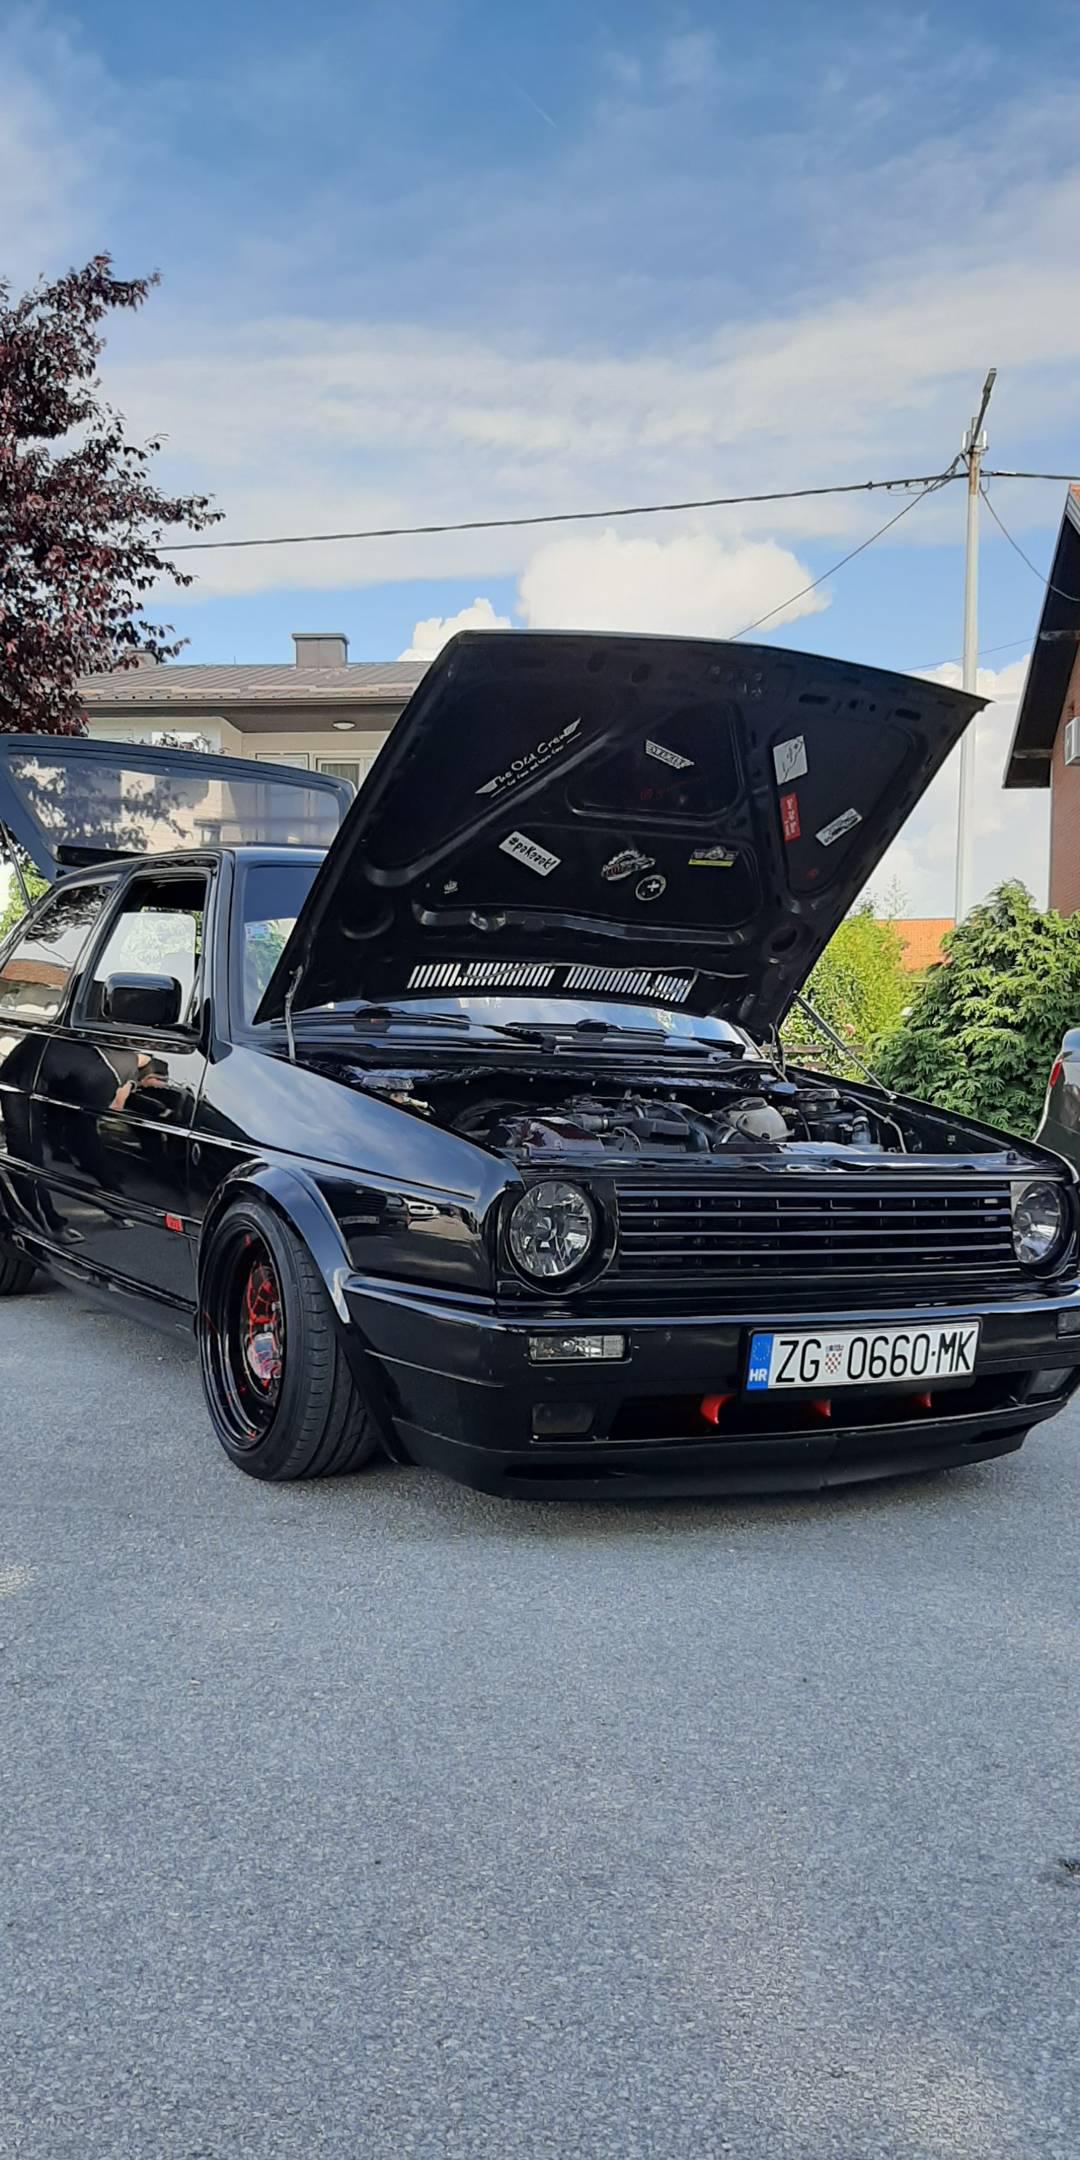 Check out this golf mk1